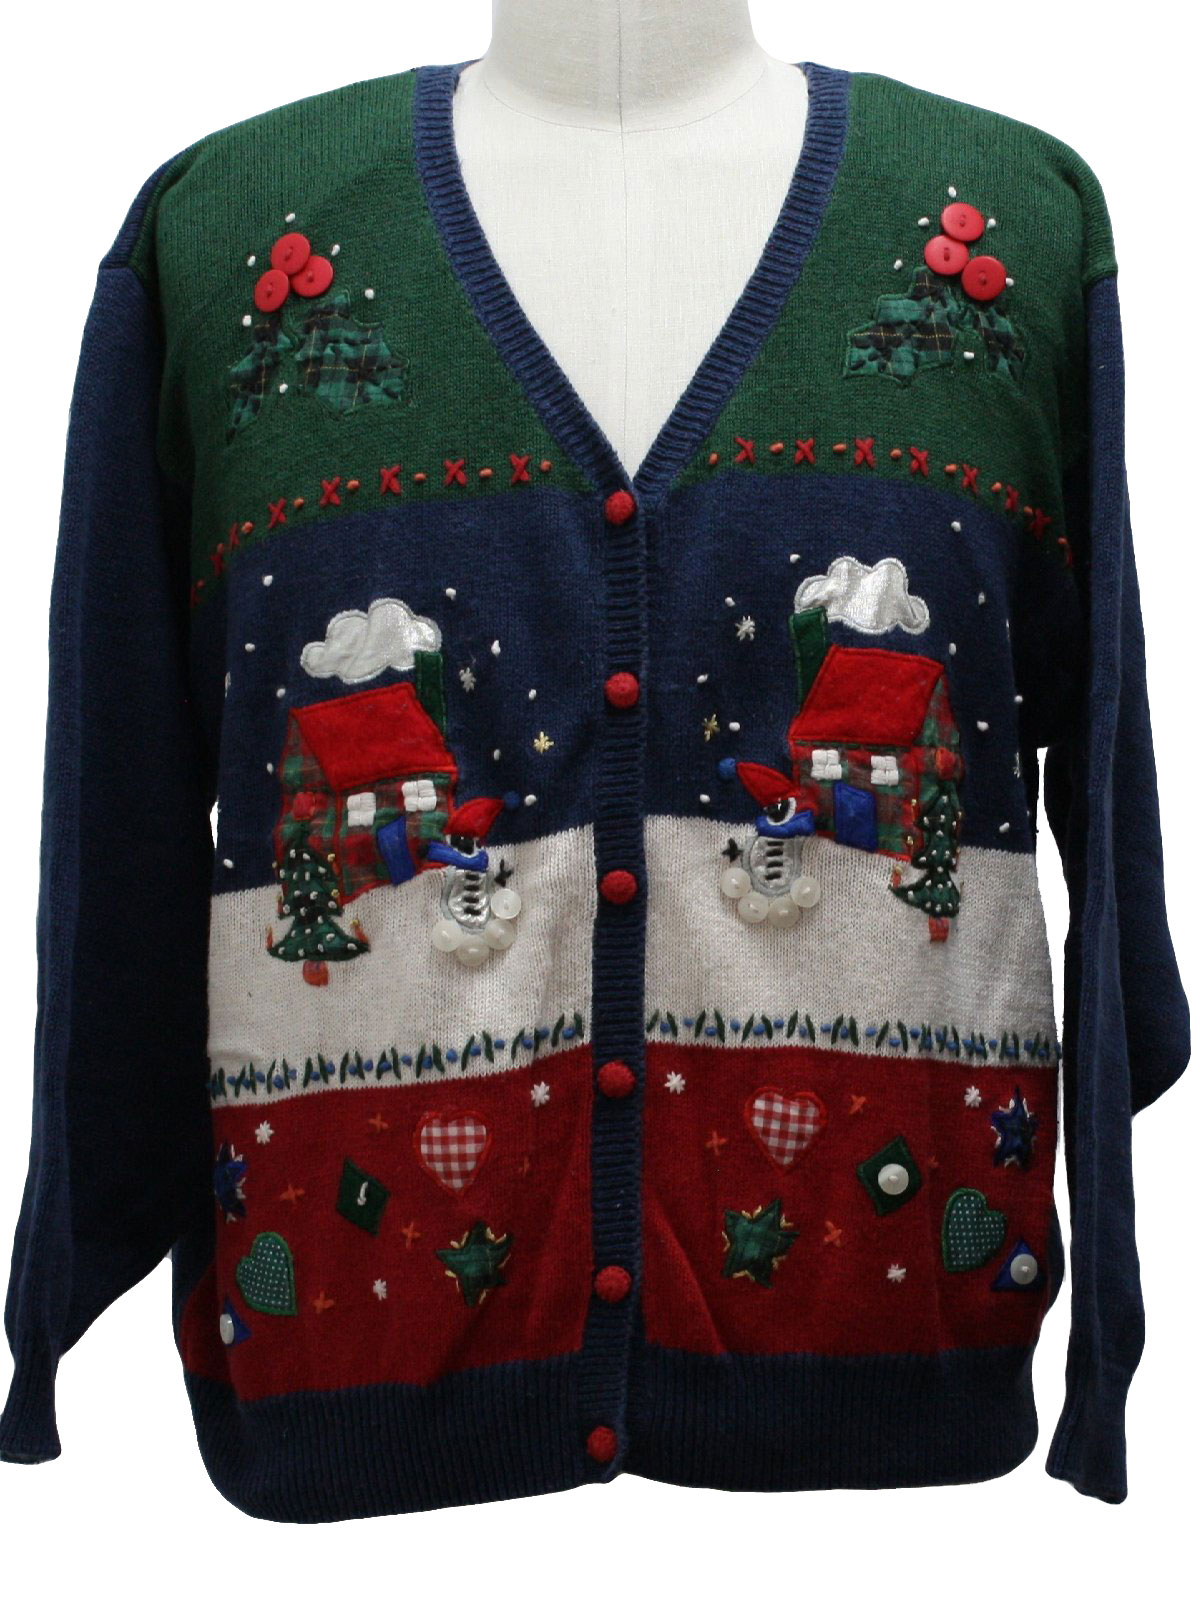 Country Kitsch Ugly Christmas Cardigan Sweater: -Arriviste- Unisex blue ...